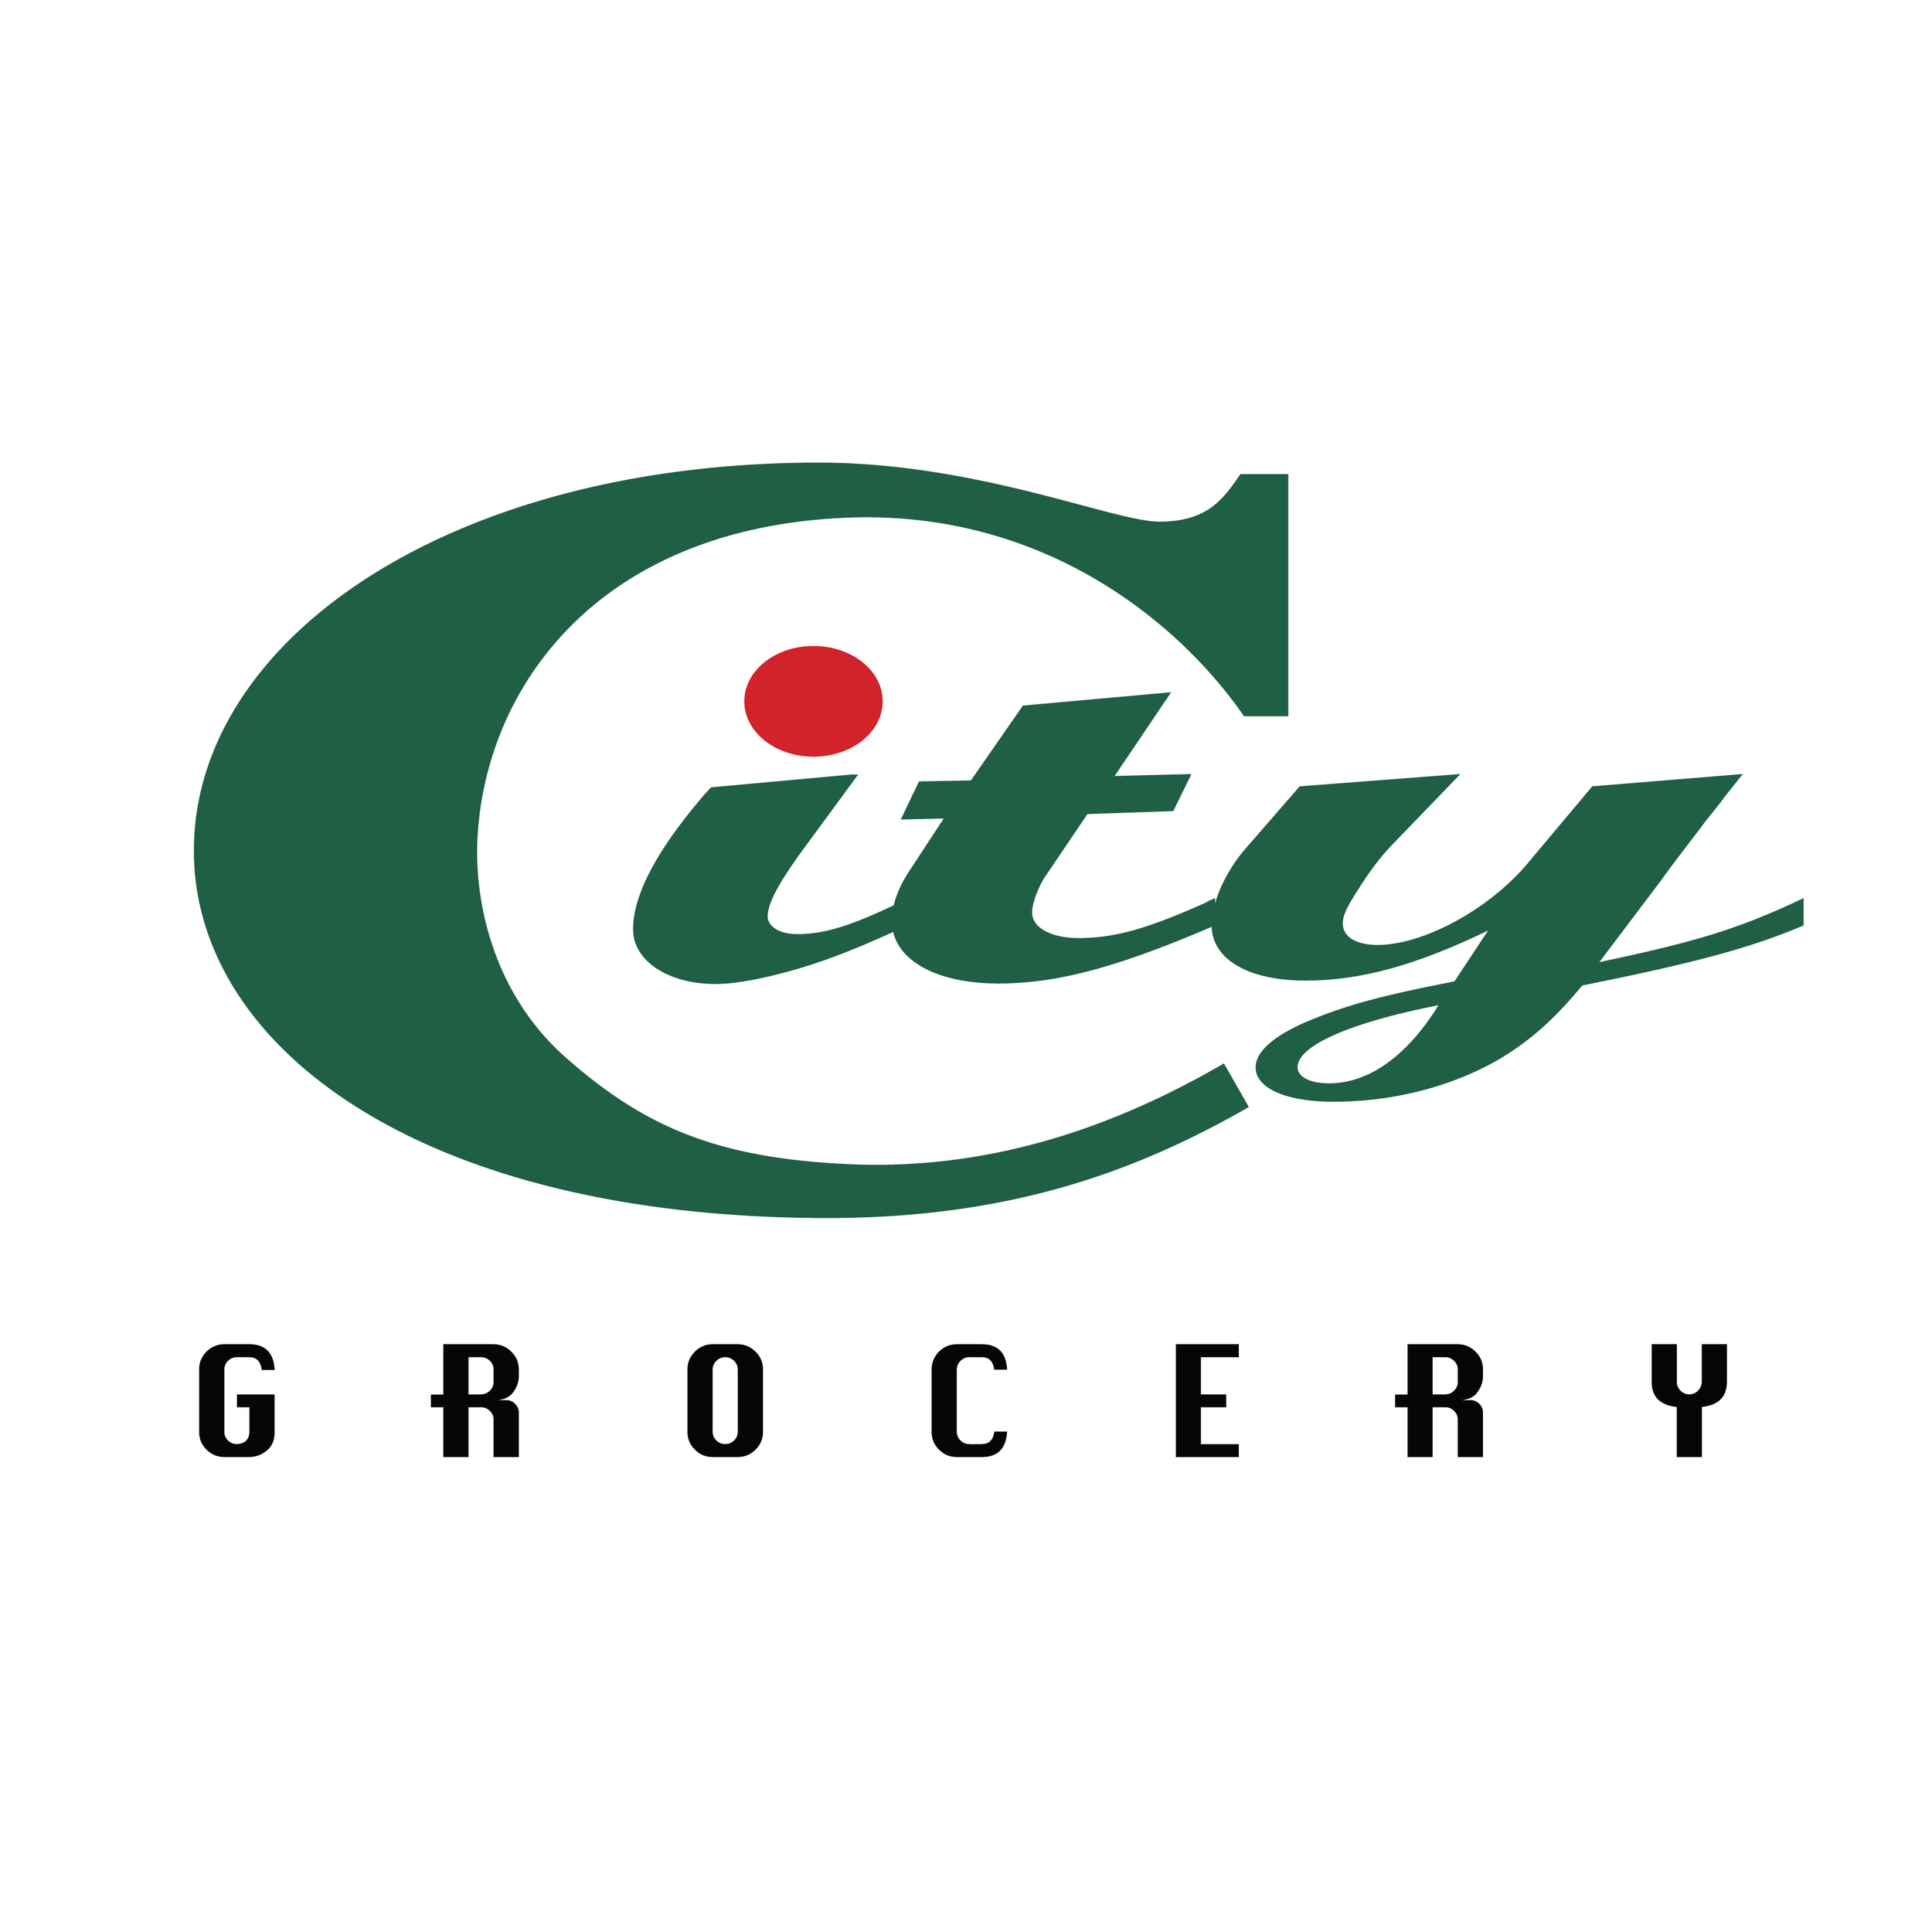  City Grocery logo  Branding creative and design by Chuck Mitchell  Front Street Memphis, TN 